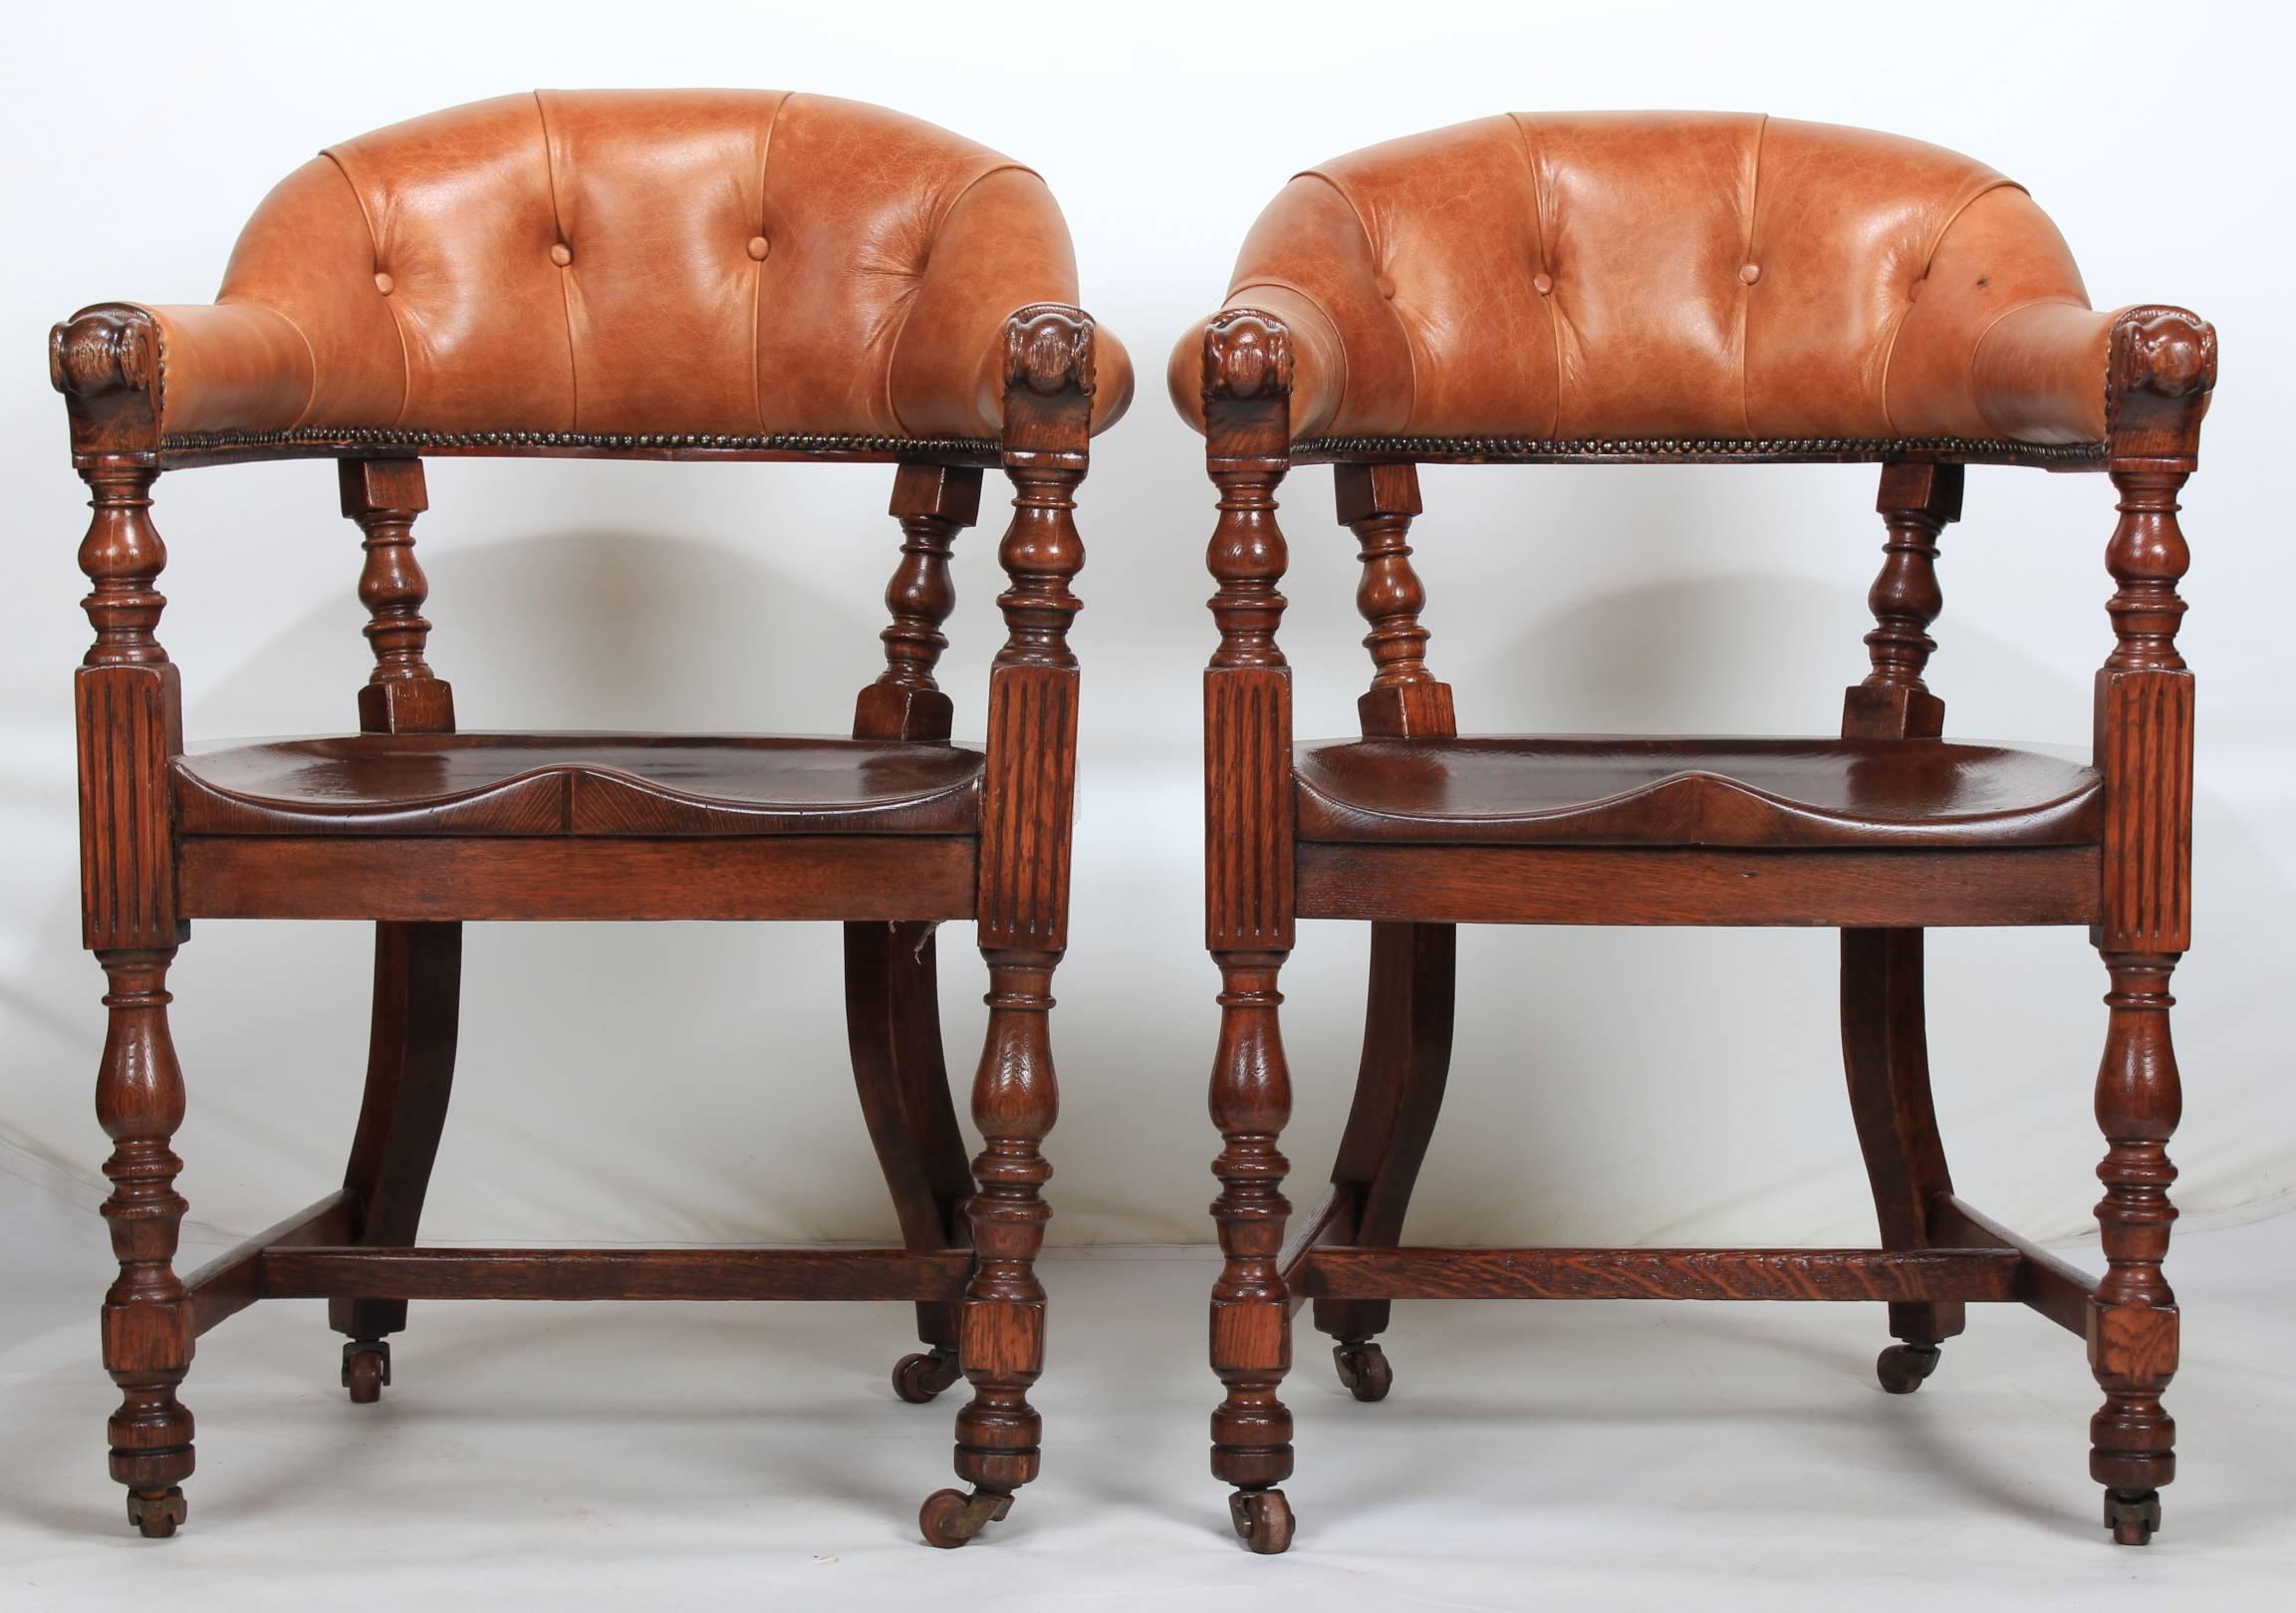 English, circa 1880.
These desk chairs have been recently releathered and are offered in showroom condition.
In the style of Jas Scholbred, these chairs consist of solid oak shaped seats, on turned legs with brass casters and a shaped buttoned